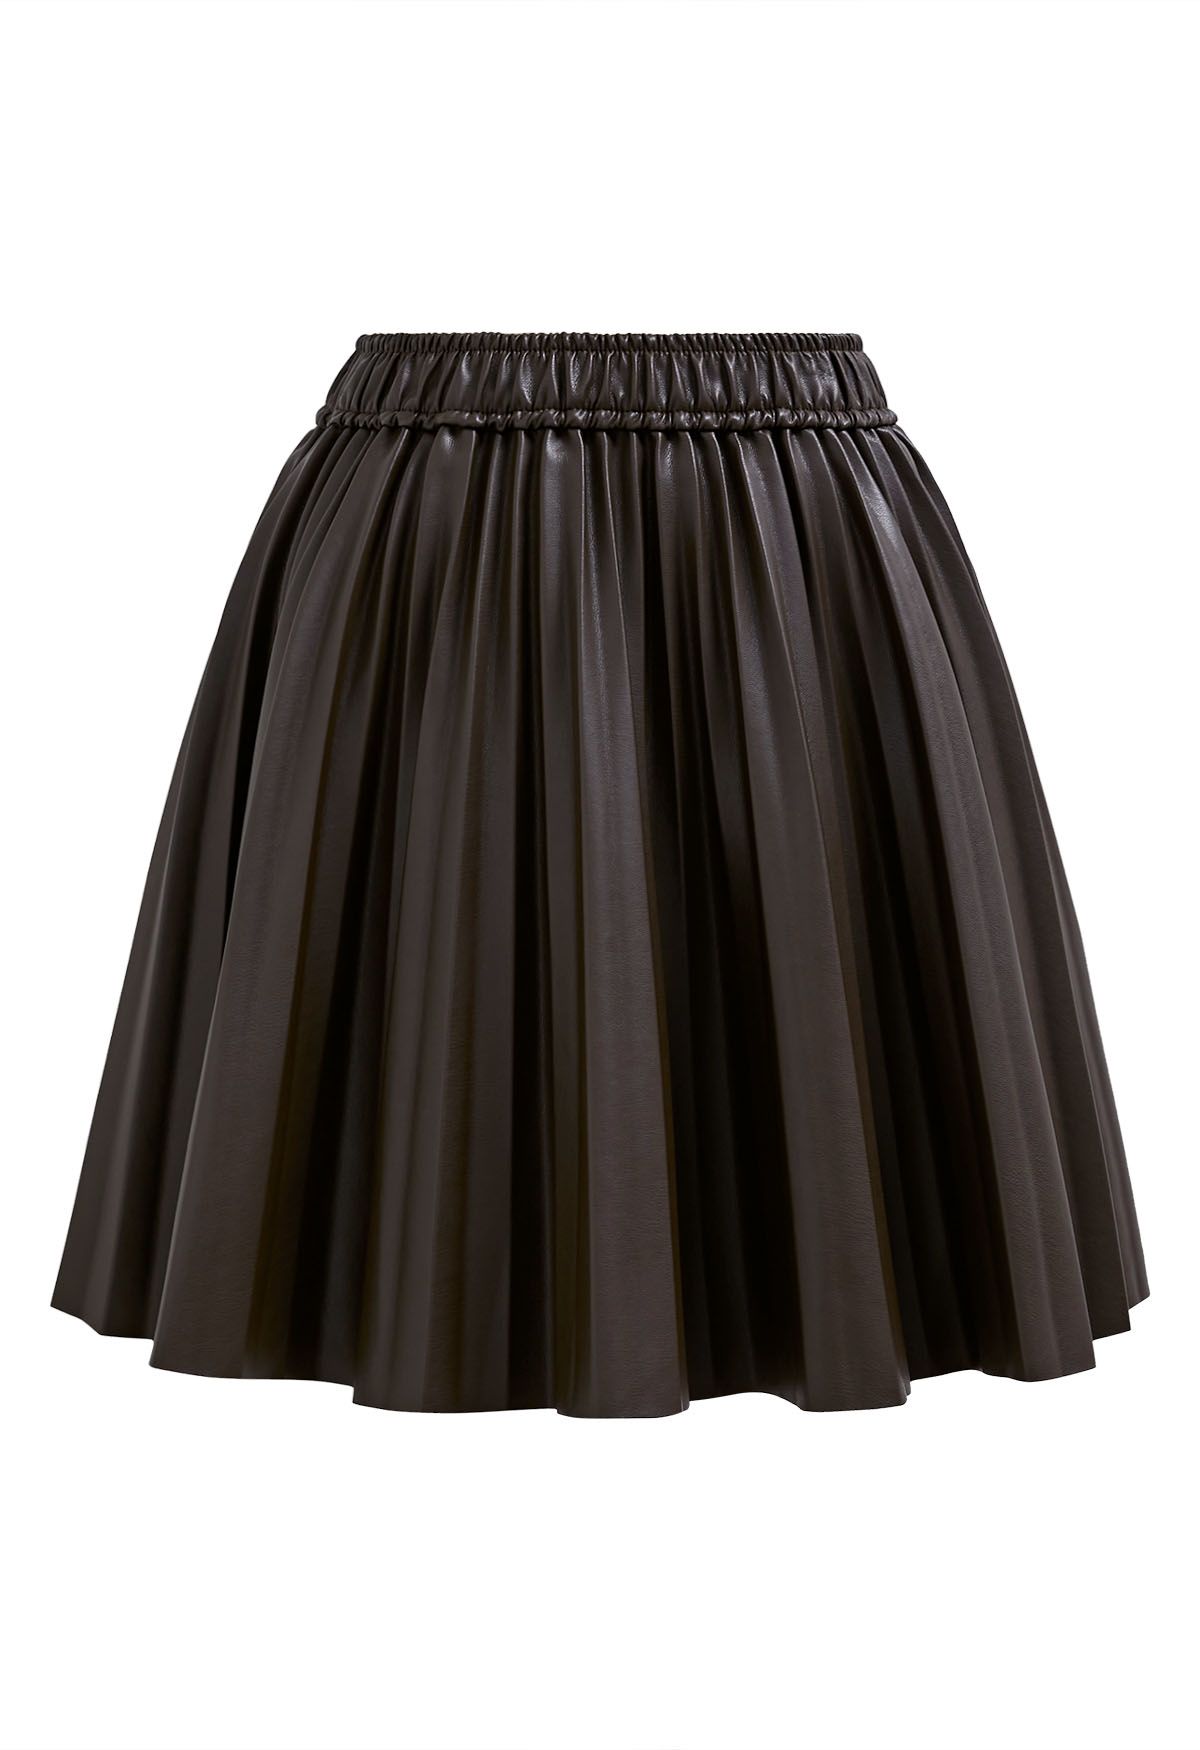 Faux Leather Pleated Mini Skirt in Brown - Retro, Indie and Unique Fashion